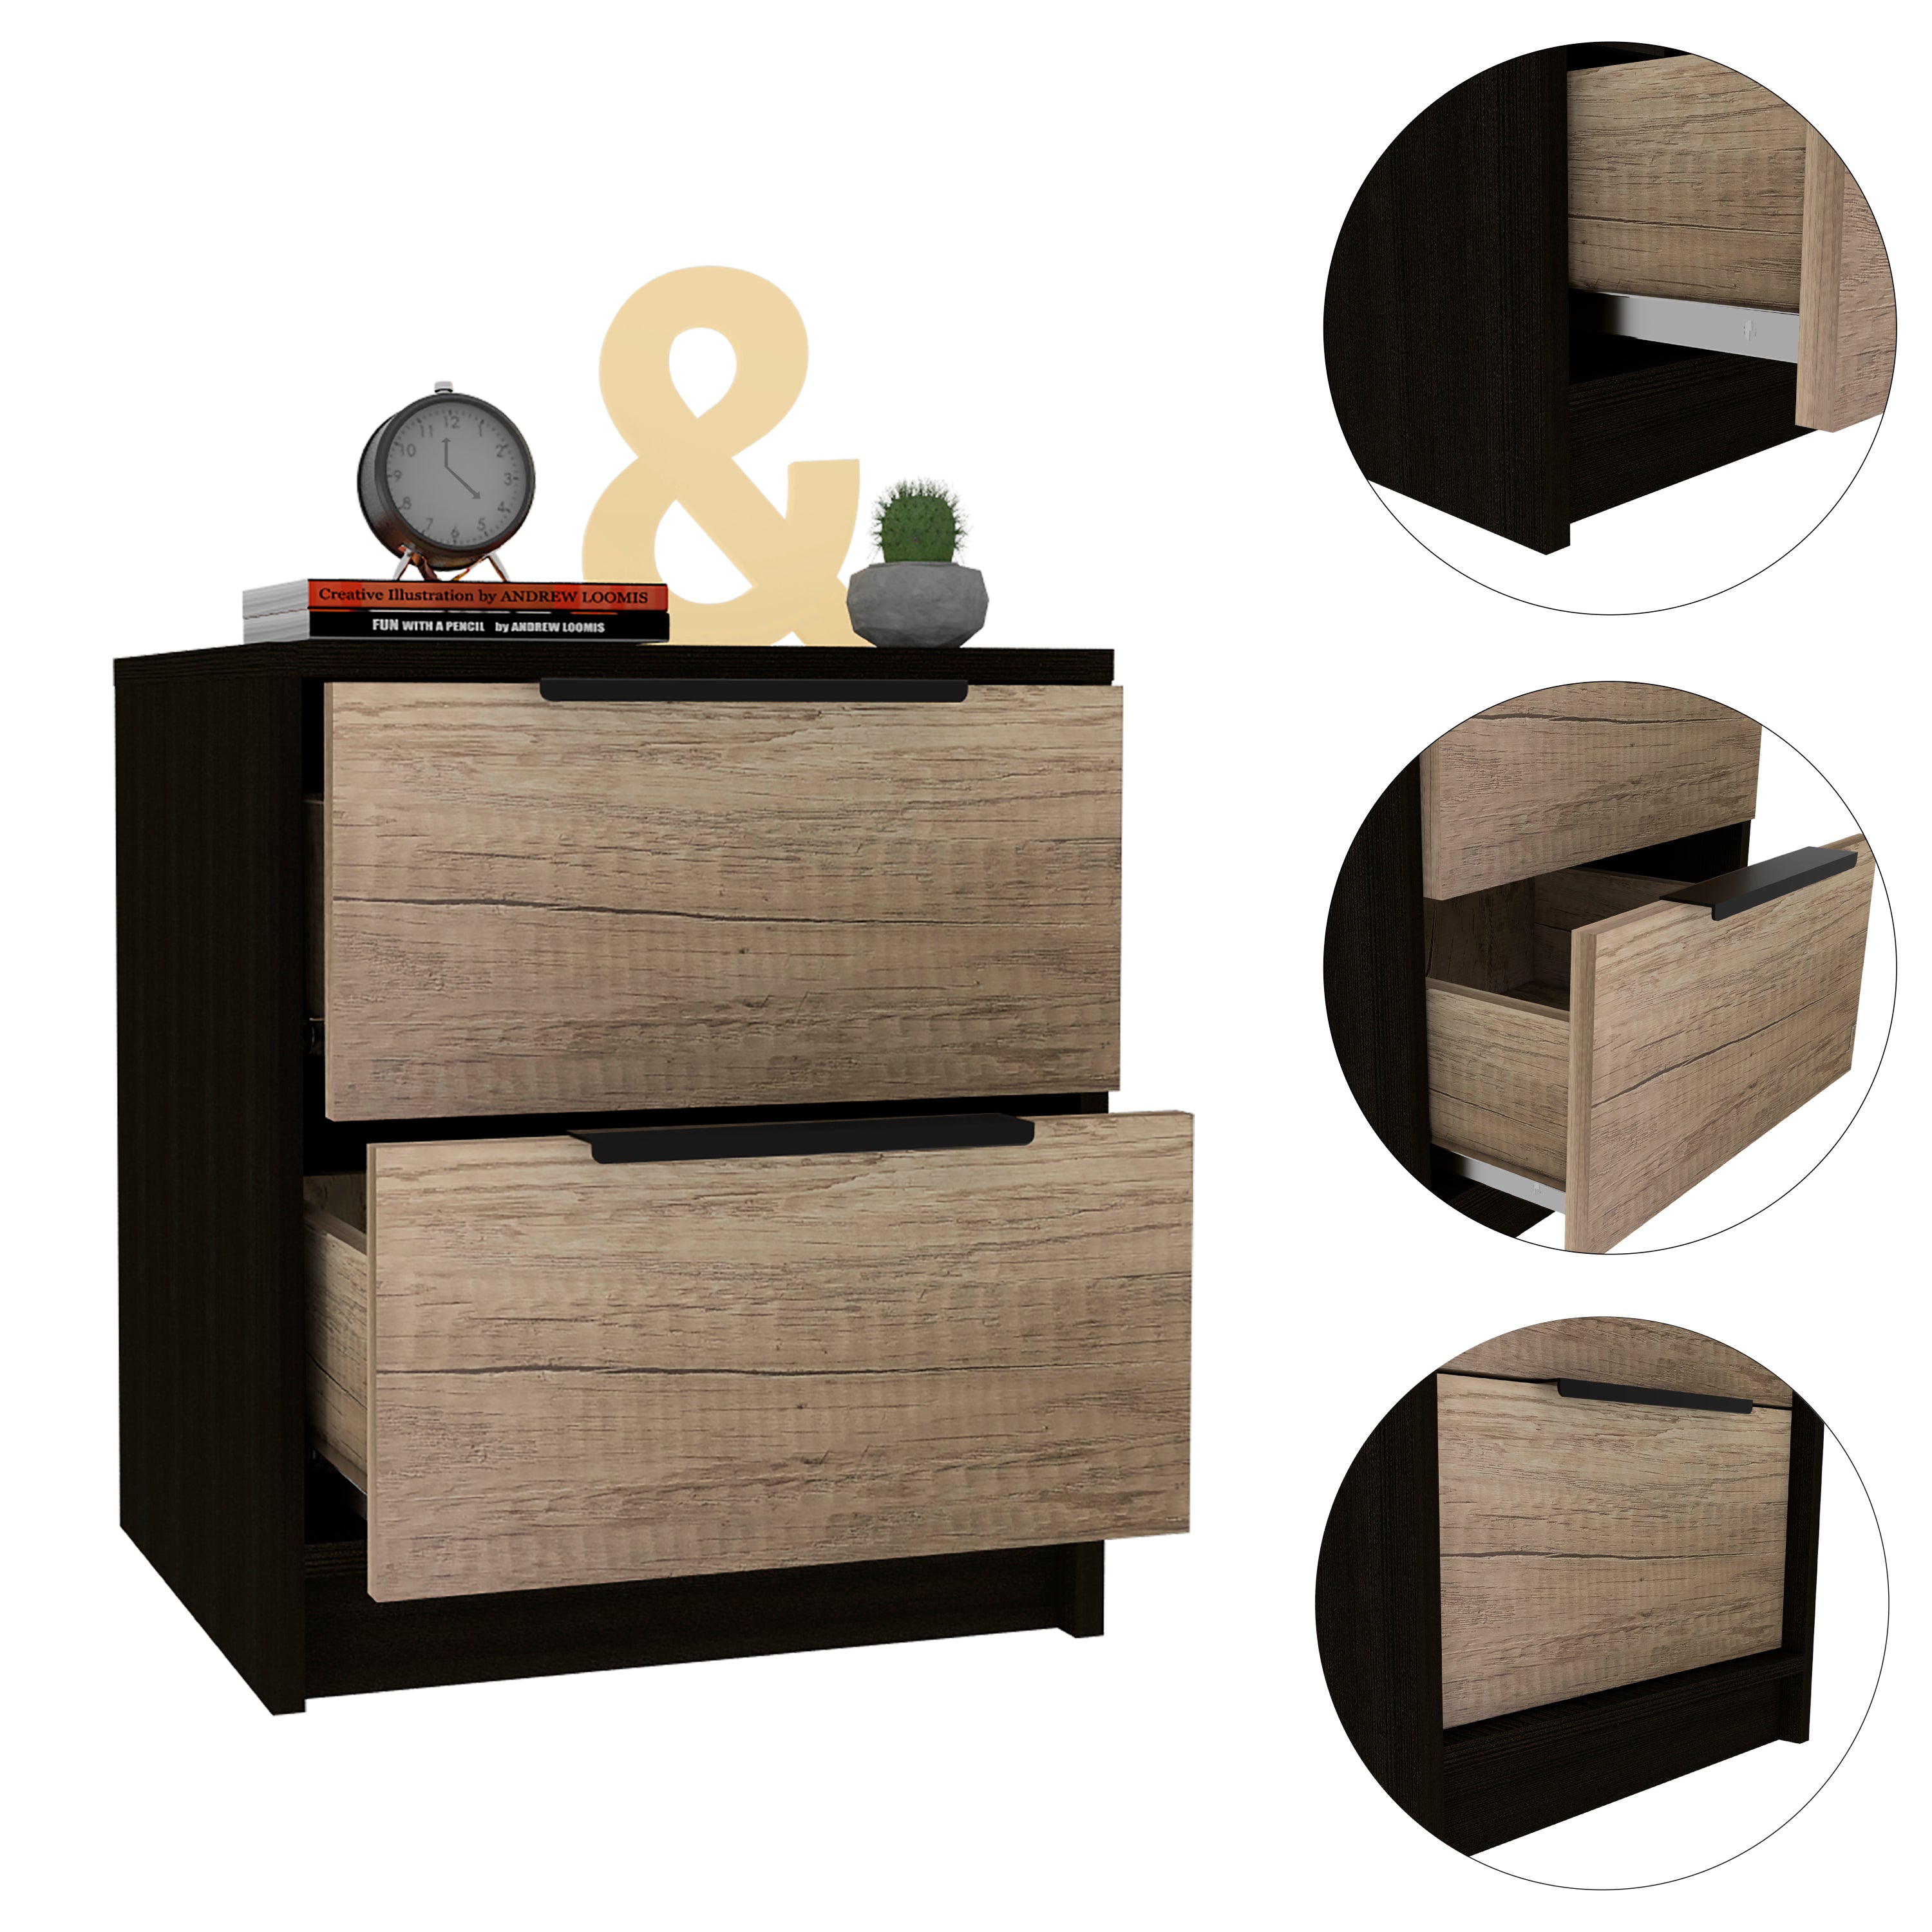 Cannon 2-Drawer Nightstand Black Wengue and Pine